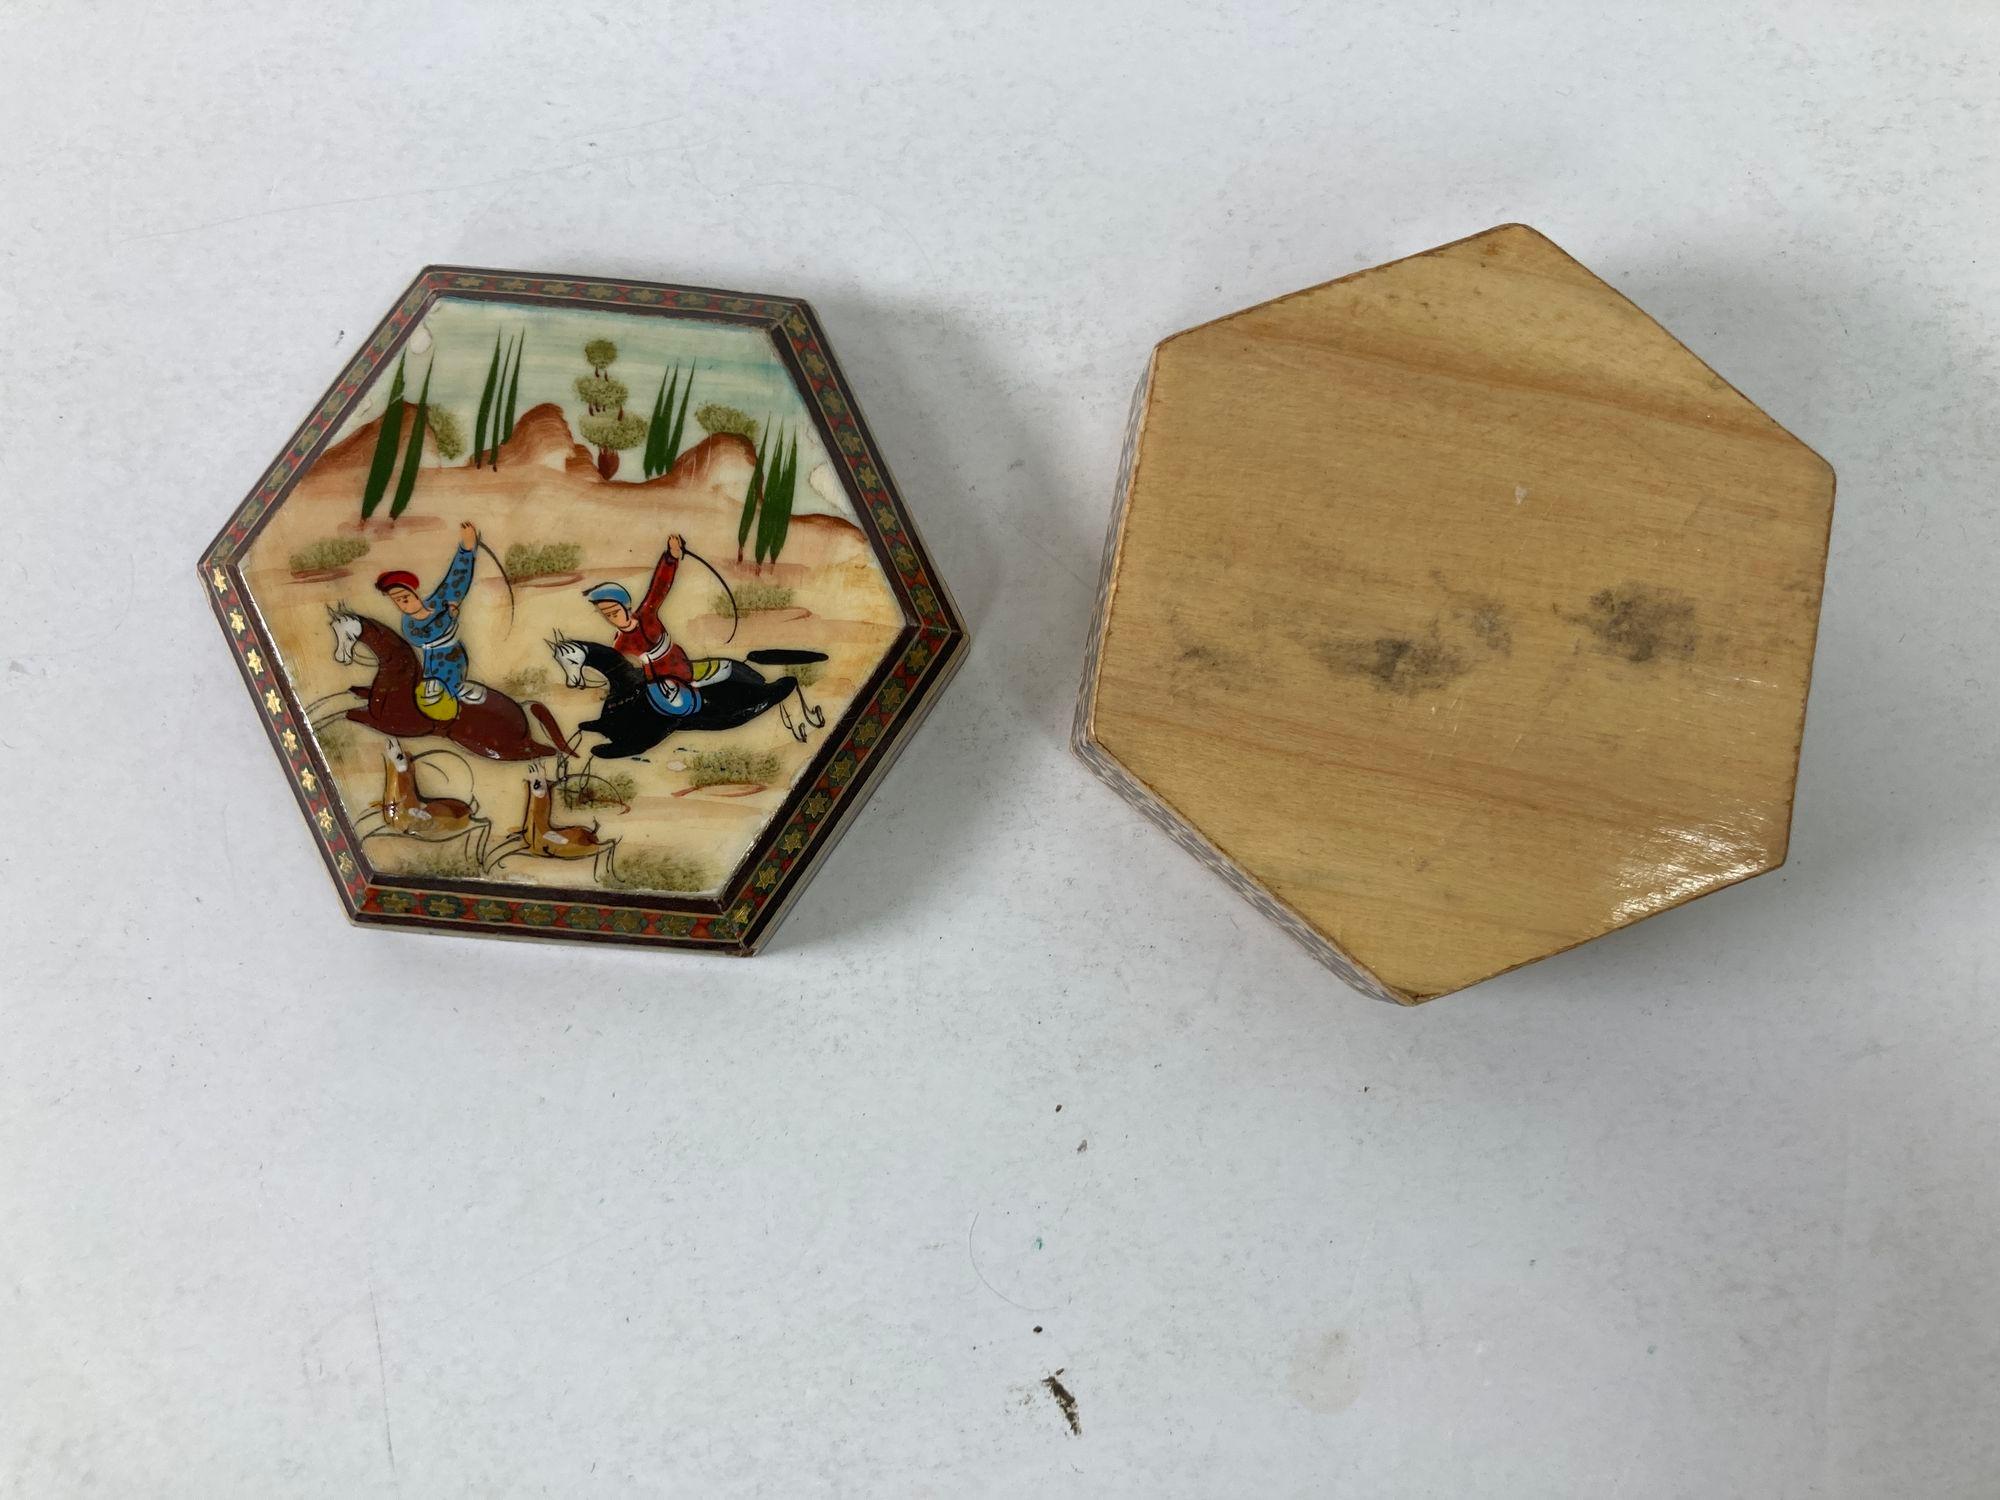 Vintage Middle Eastern Persian Khatam Trinket Box with Miniature Art Painting For Sale 2